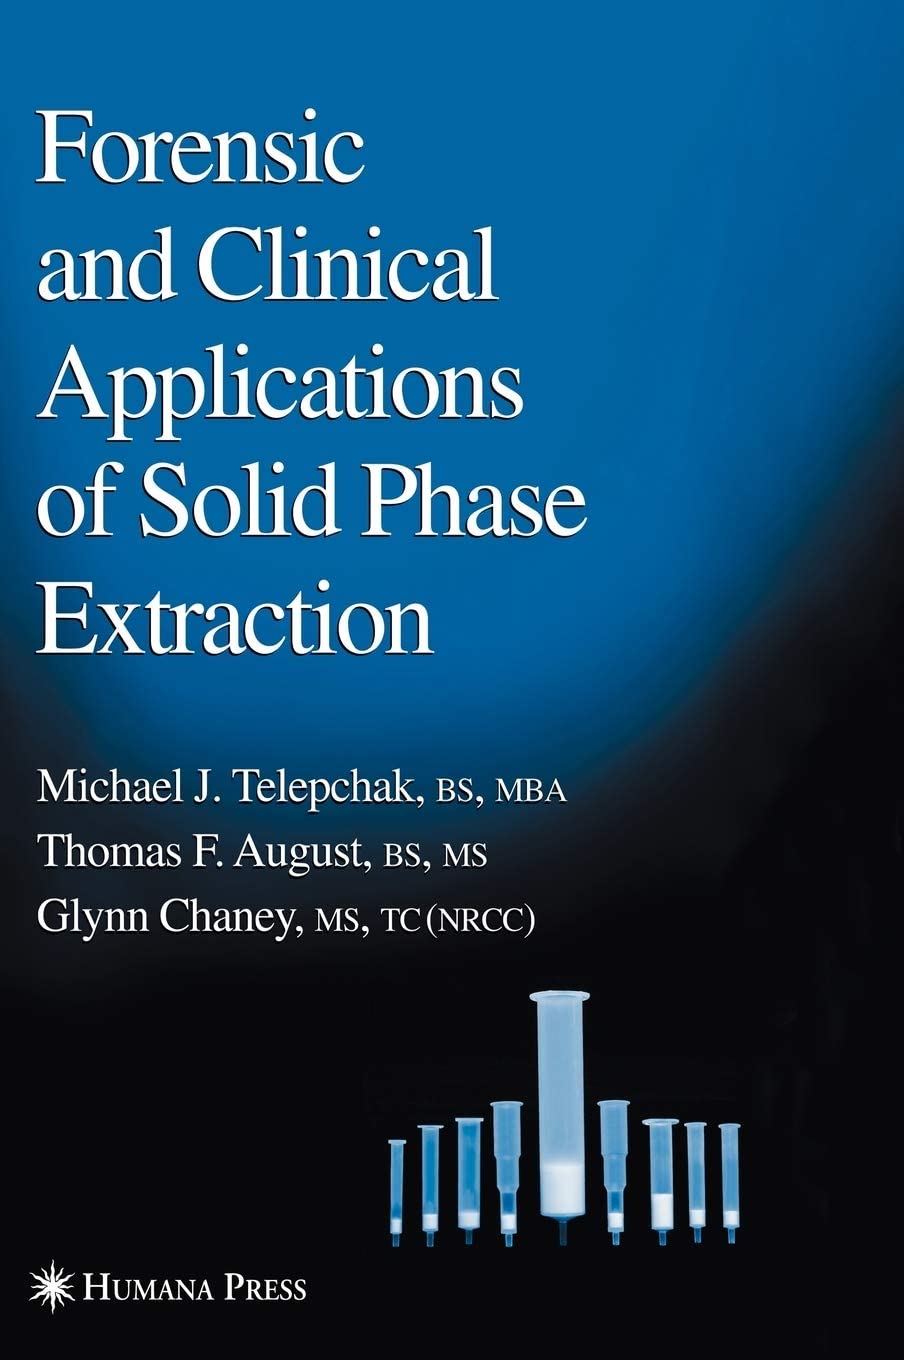 Forensic and Clinical Applications of Solid Phase Extraction (Forensic Science and Medicine)